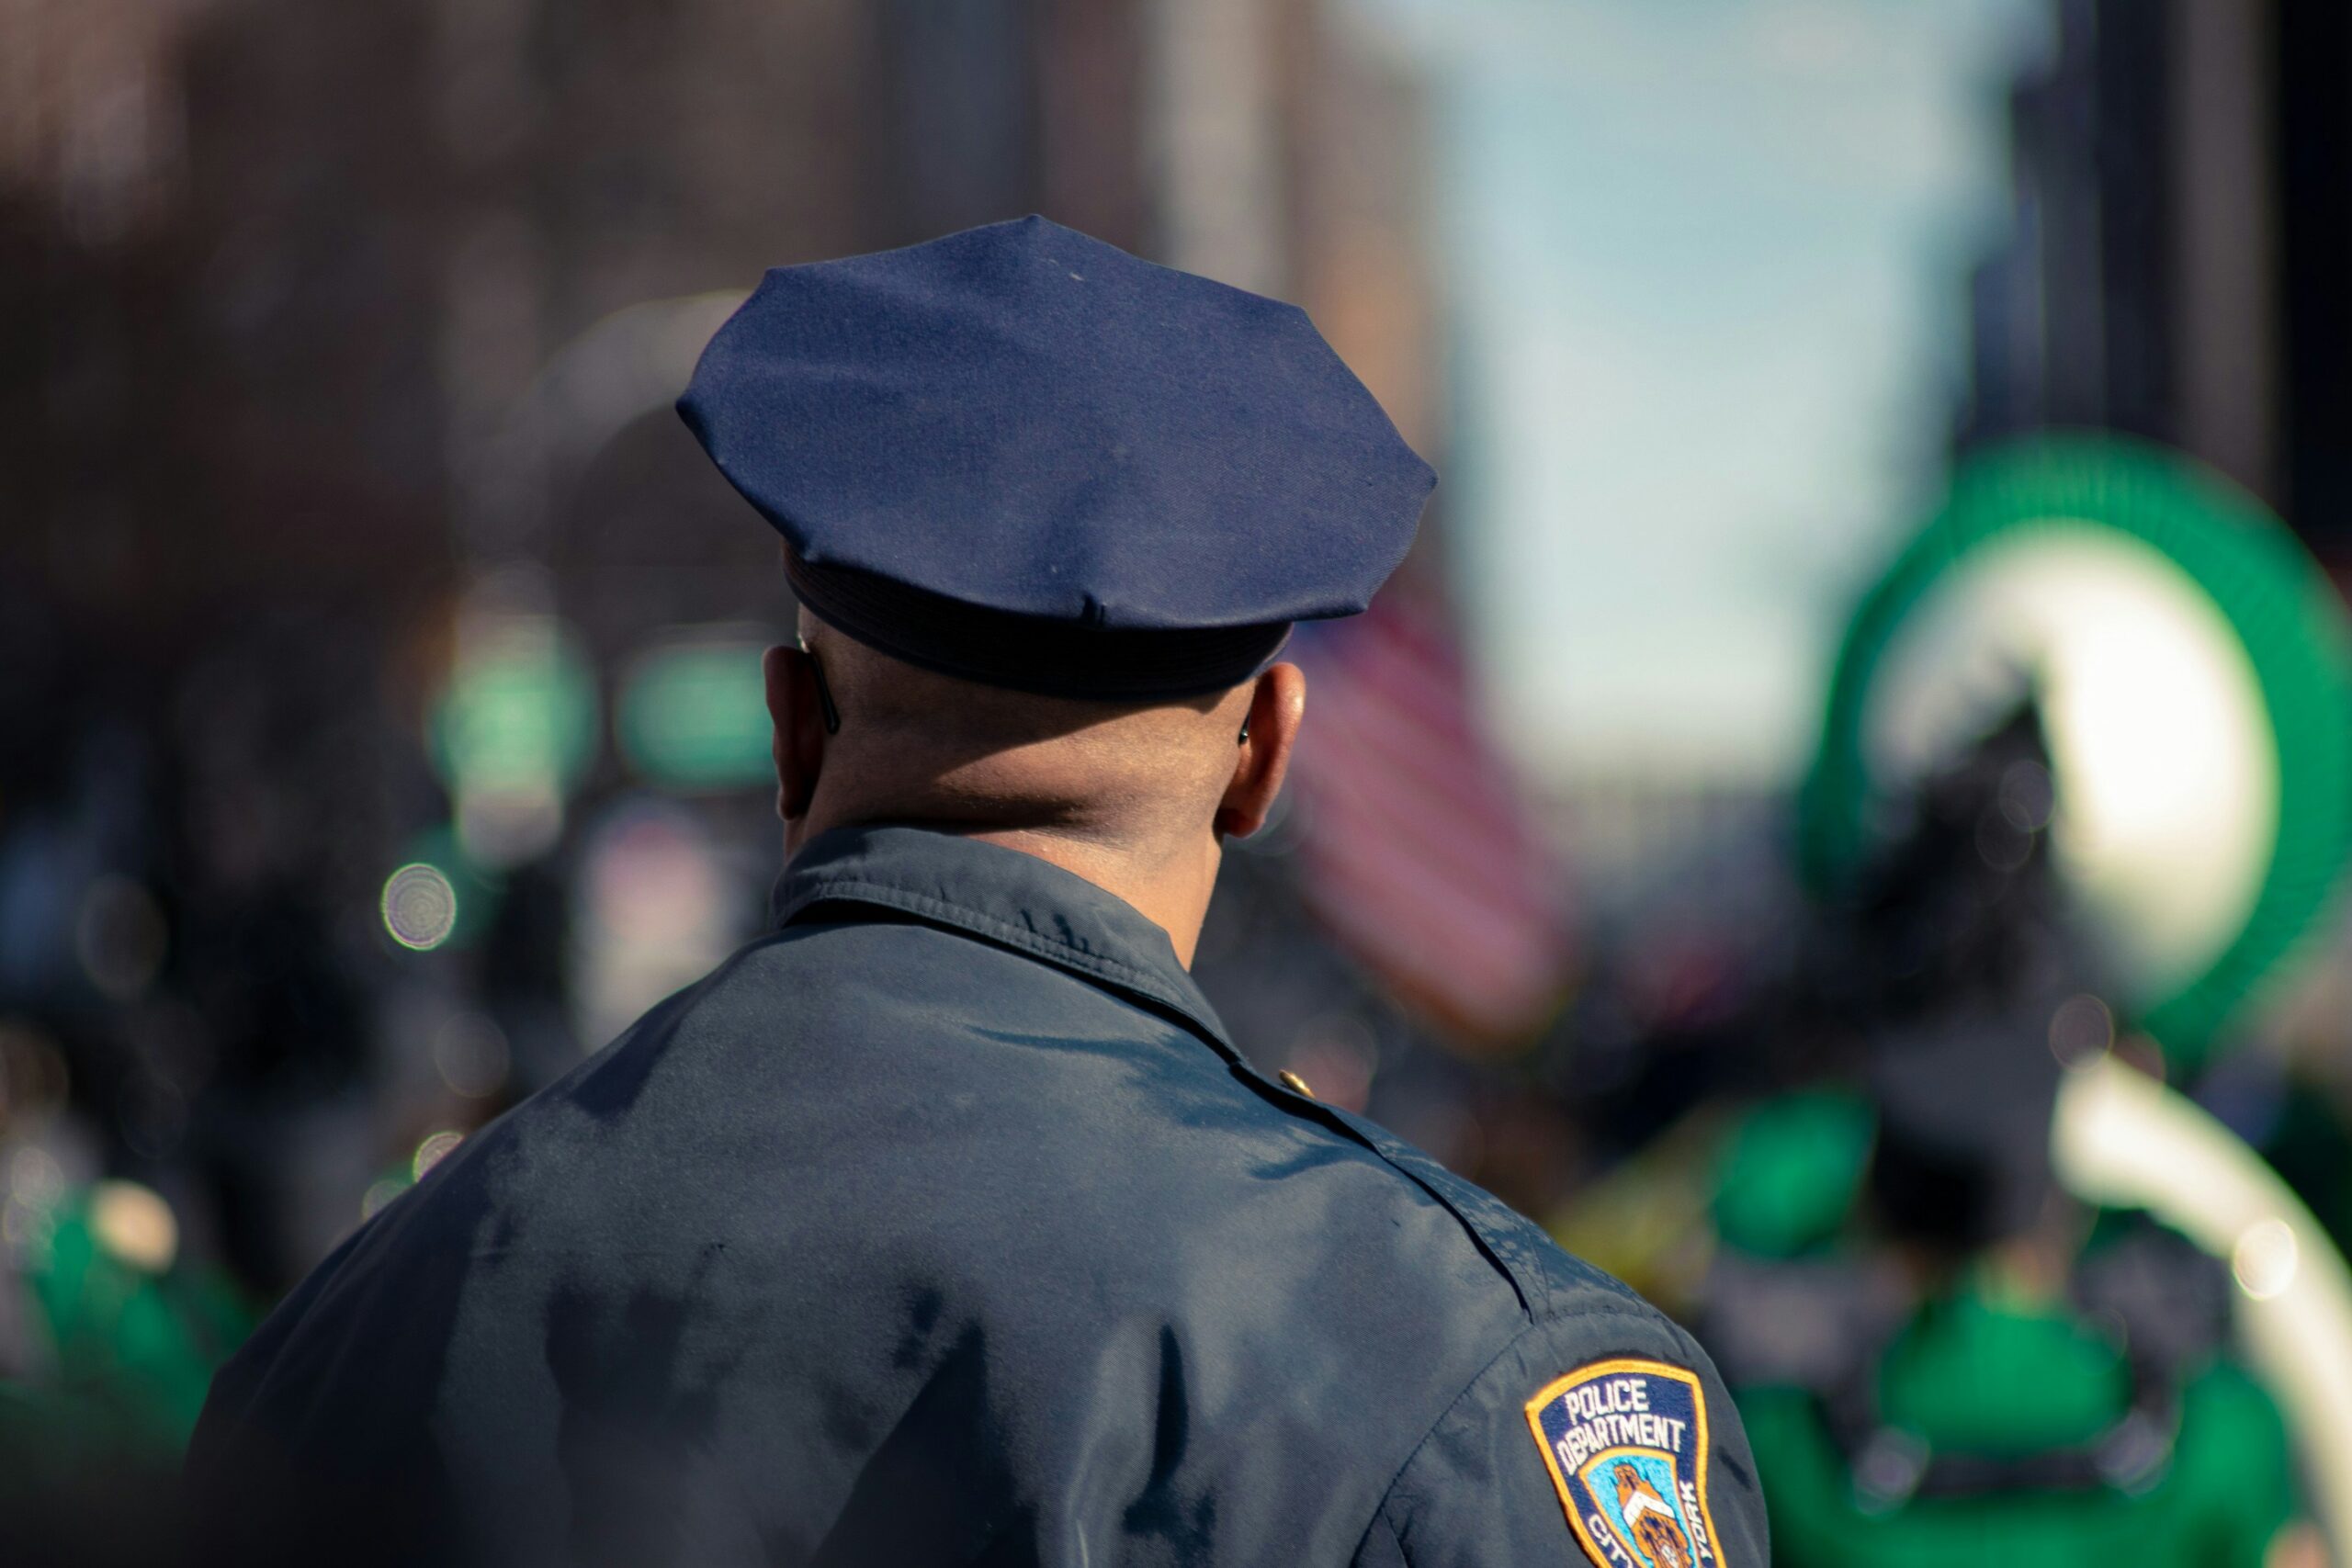 A uniformed police officer stands with his back to the camera, observing a public event with a flag and green decorations in the background.